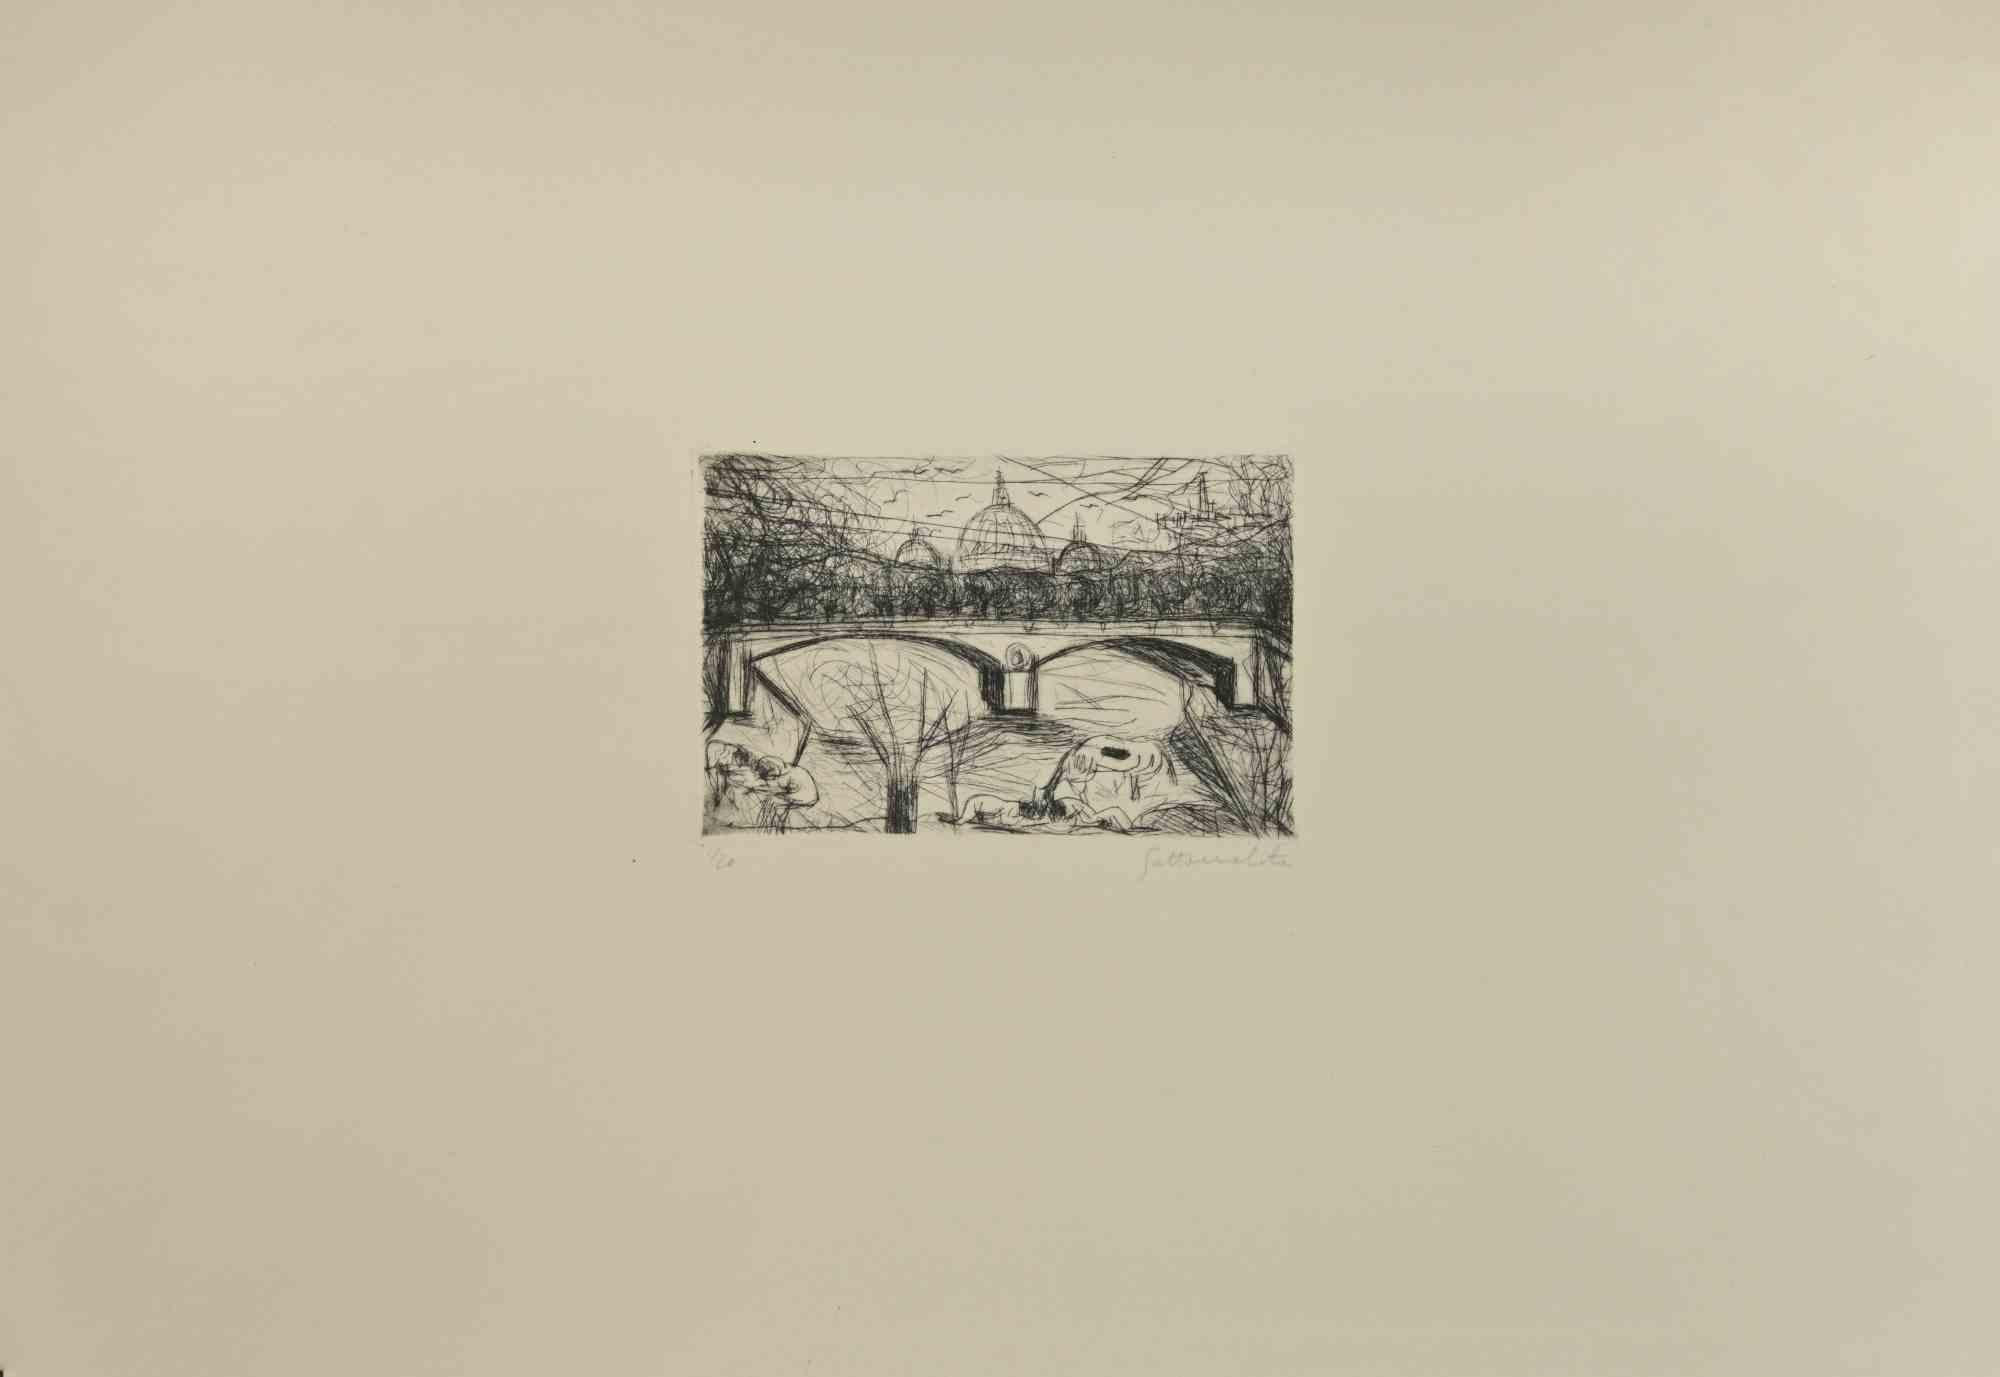 The View of St. Peter and Tiber in Rome  is a black and white etching realized by  Nazareno Gattamelata  in the 1970s.

Hand signed by the artist on the lower right margin:  Gattamelata .

Numbered on the lower left margin. Edition n. 1 of 20